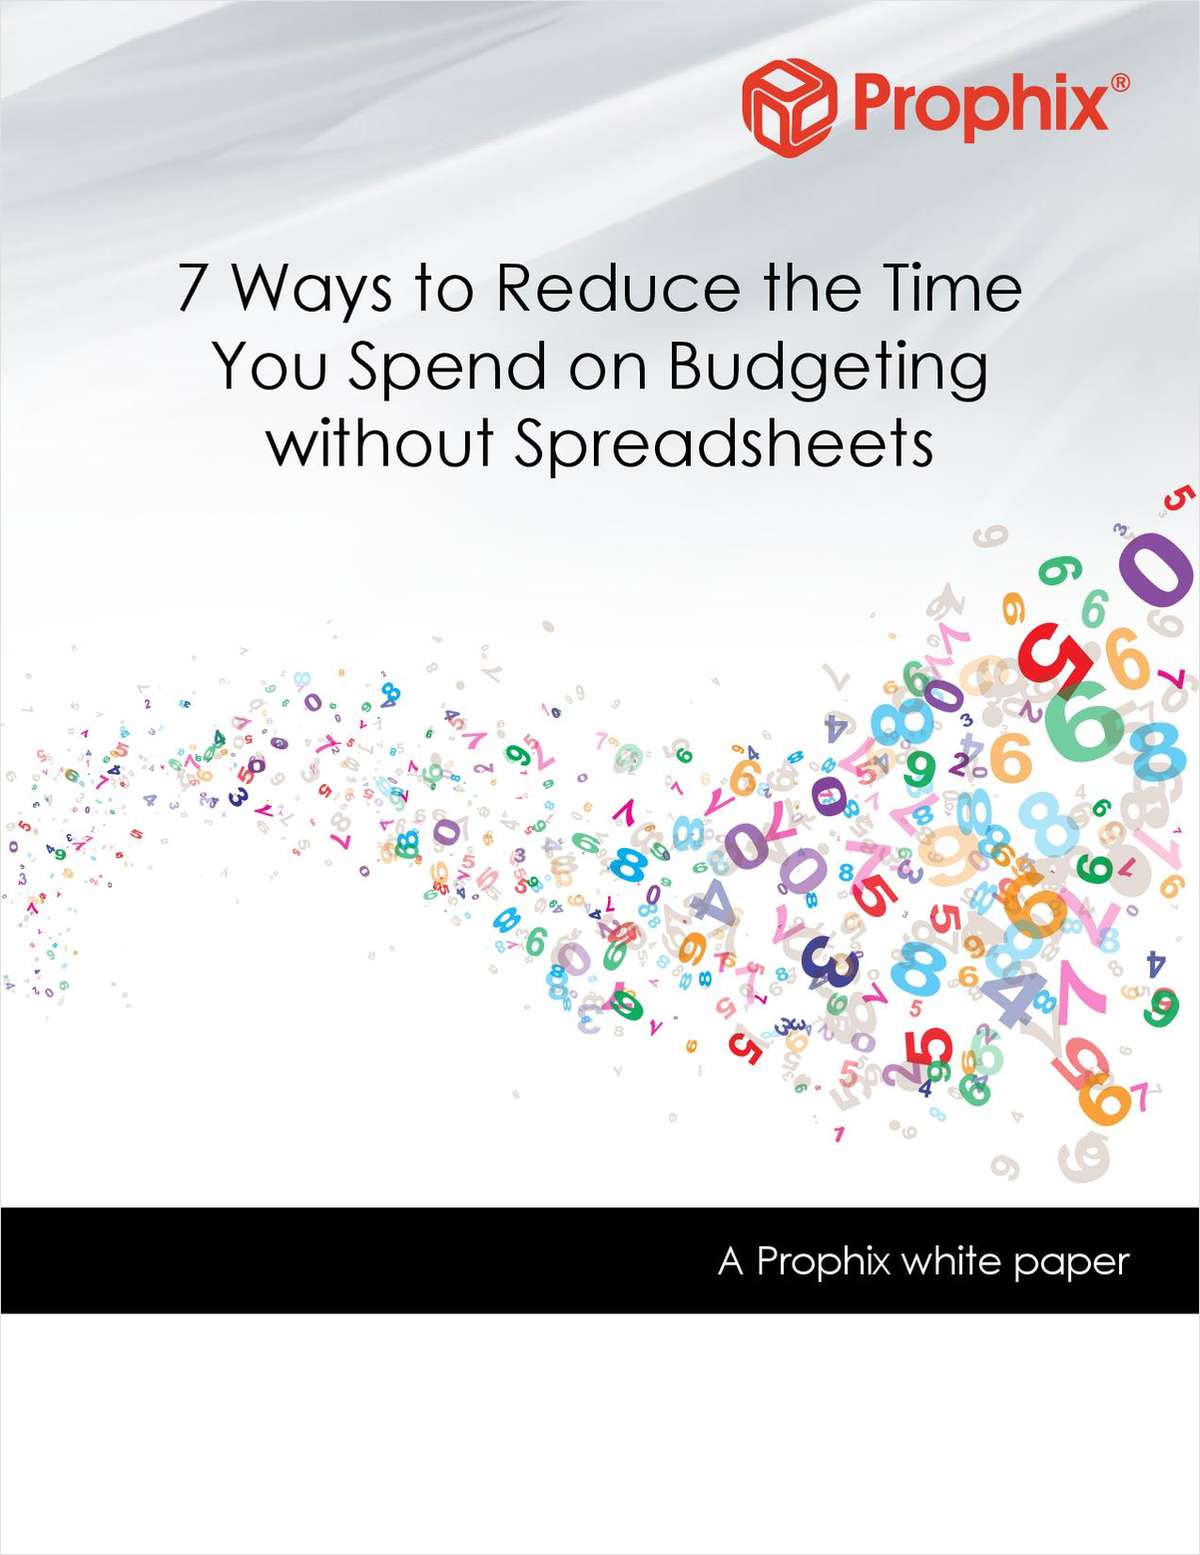 7 Ways To Reduce The Time You Spend On Budgeting Without Spreadsheets